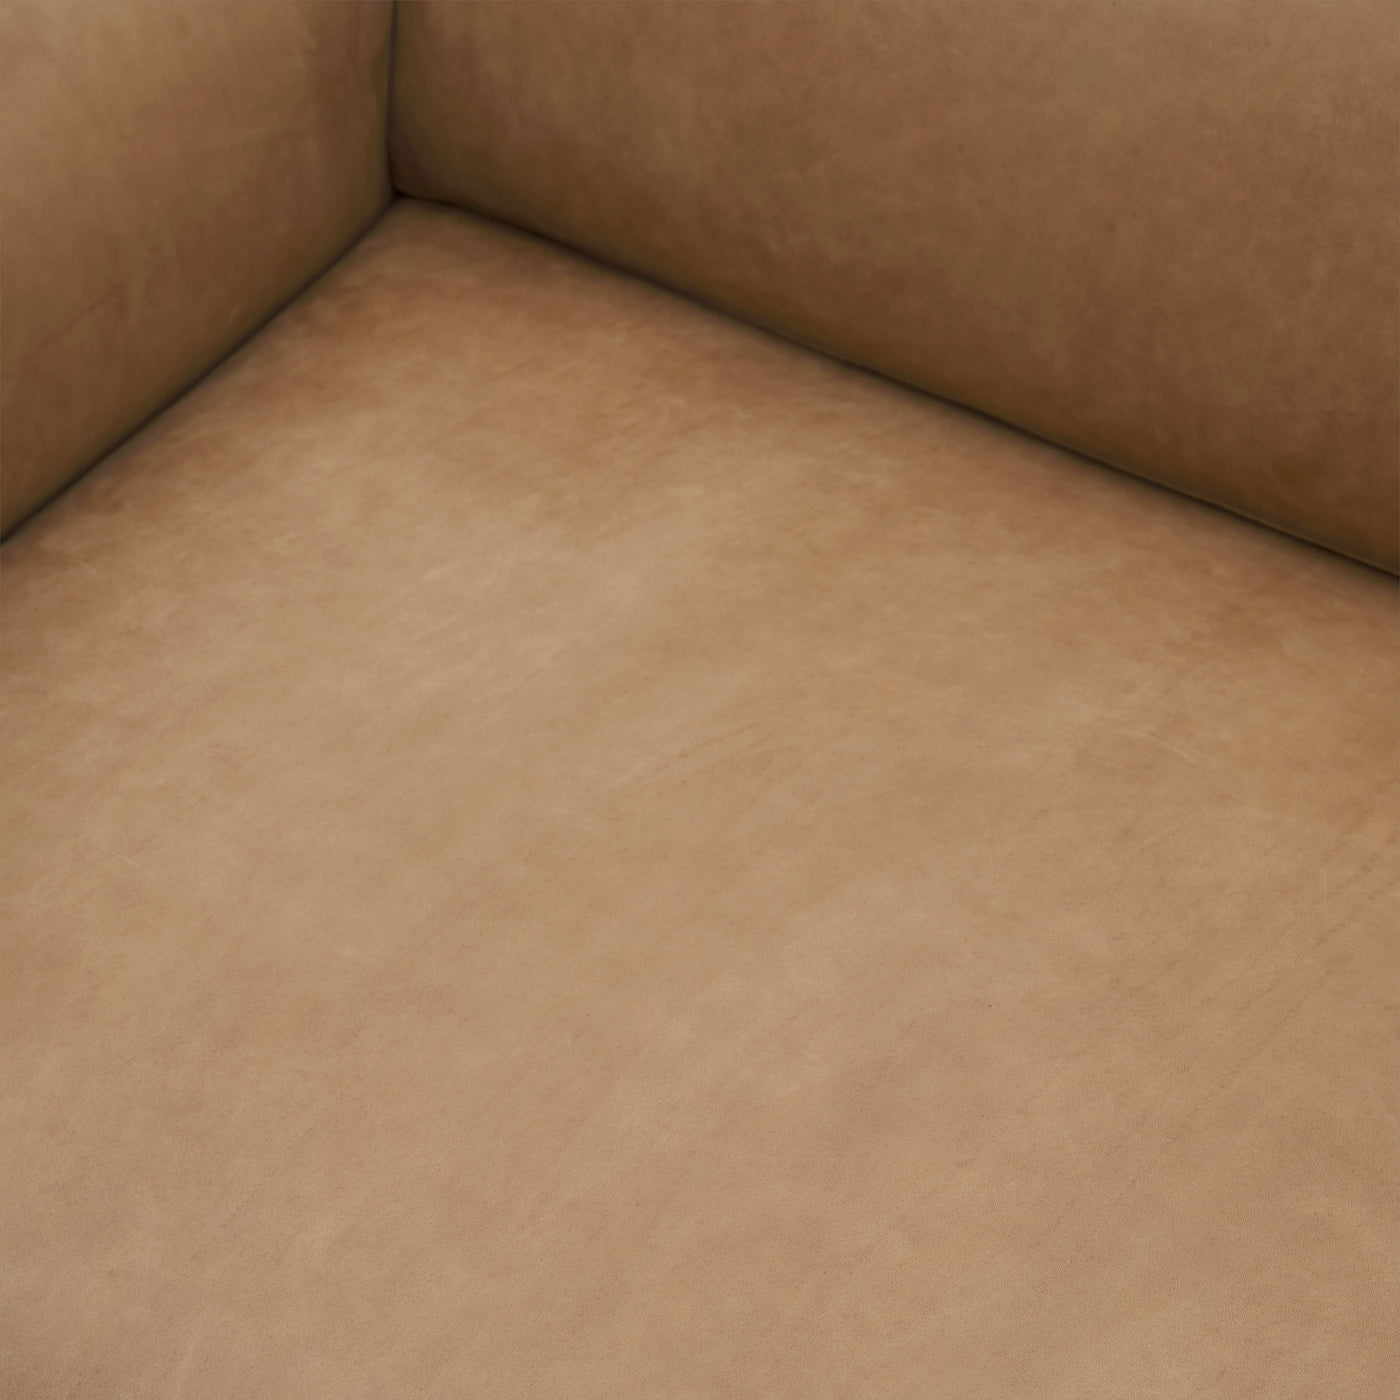 Muuto Outline Chaise Longue sofa in grace leather. Made to order from someday designs. #colour_camel-grace-leather